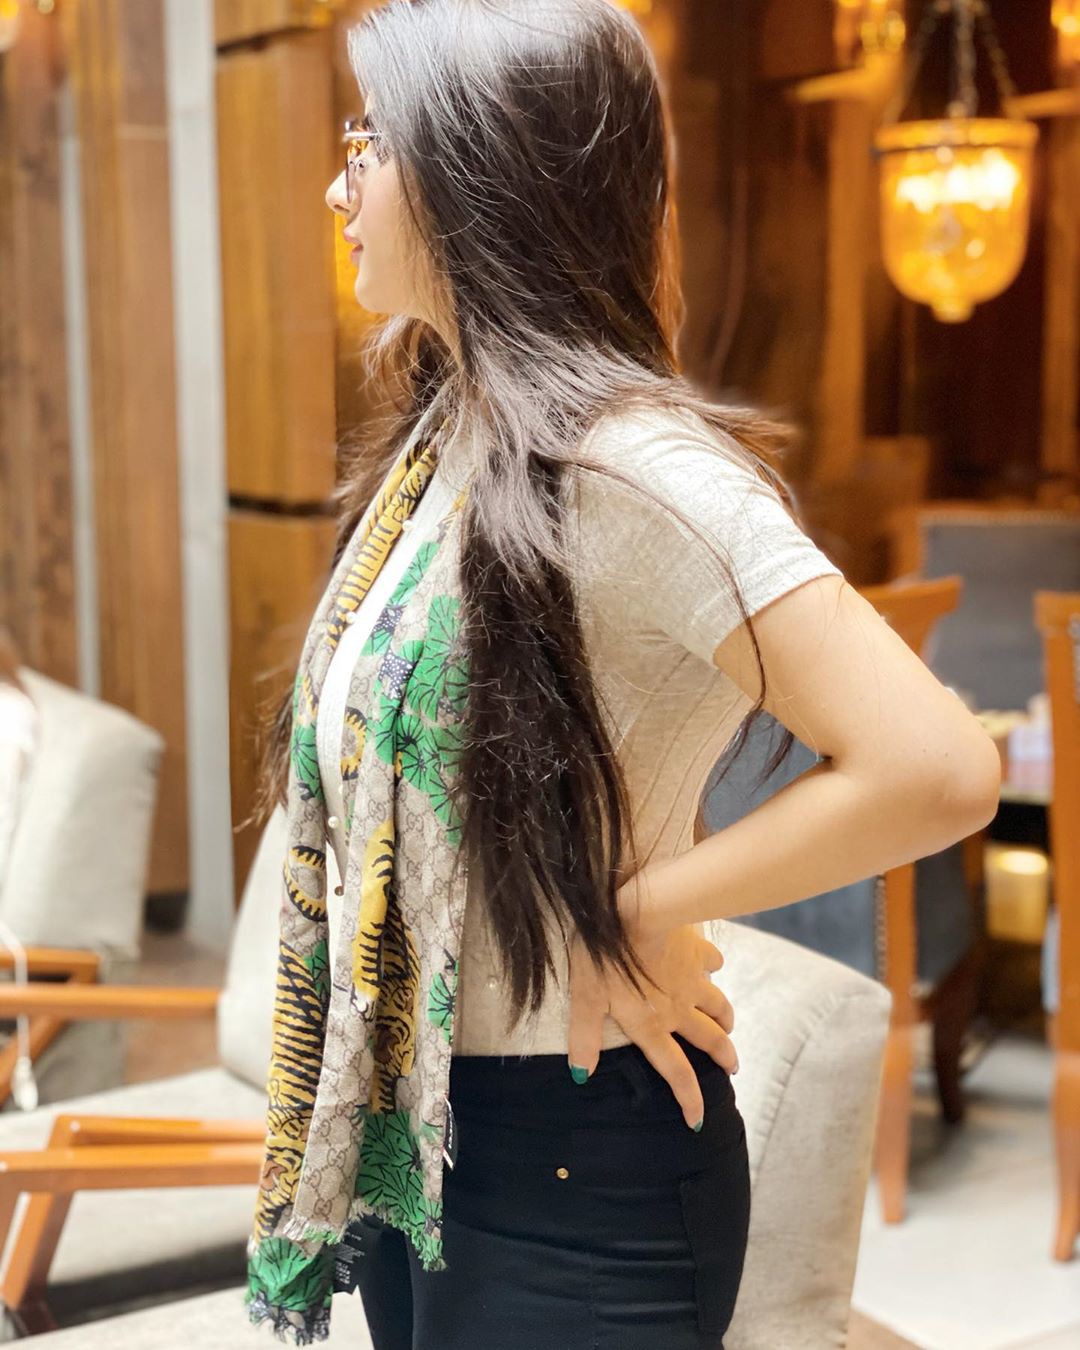 Alishbah Anjum Woman Long Hair Style, Hairstyle For Women, Simple Hairstyle  | Cute Indian Girl - Alishbah Anjum | Alishbah Anjum Instagram, Hair  coloring, Yellow And Green Outfit